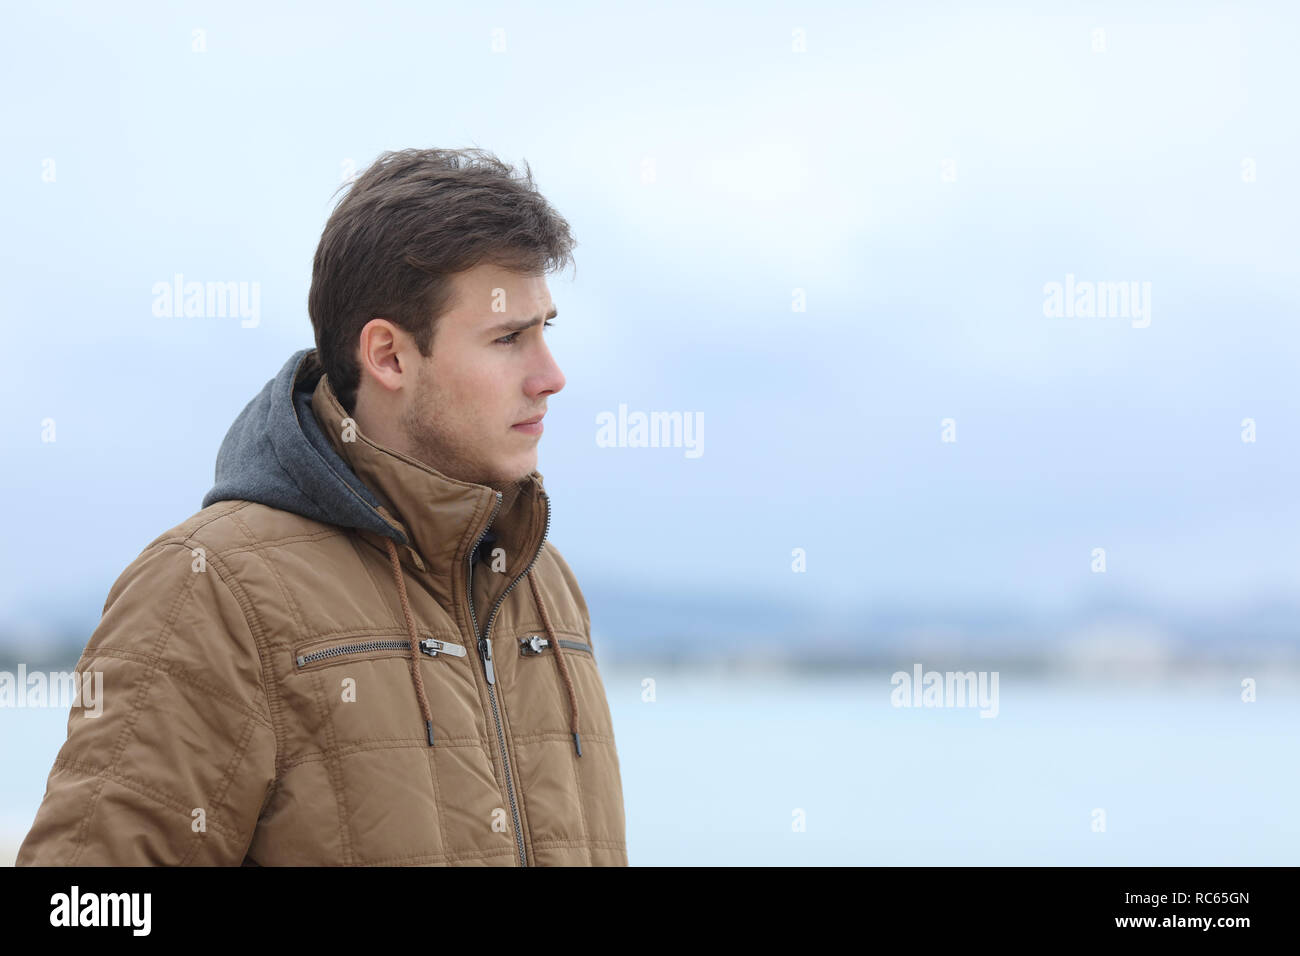 Side view portrait of a sad man looking away on the beach Stock Photo